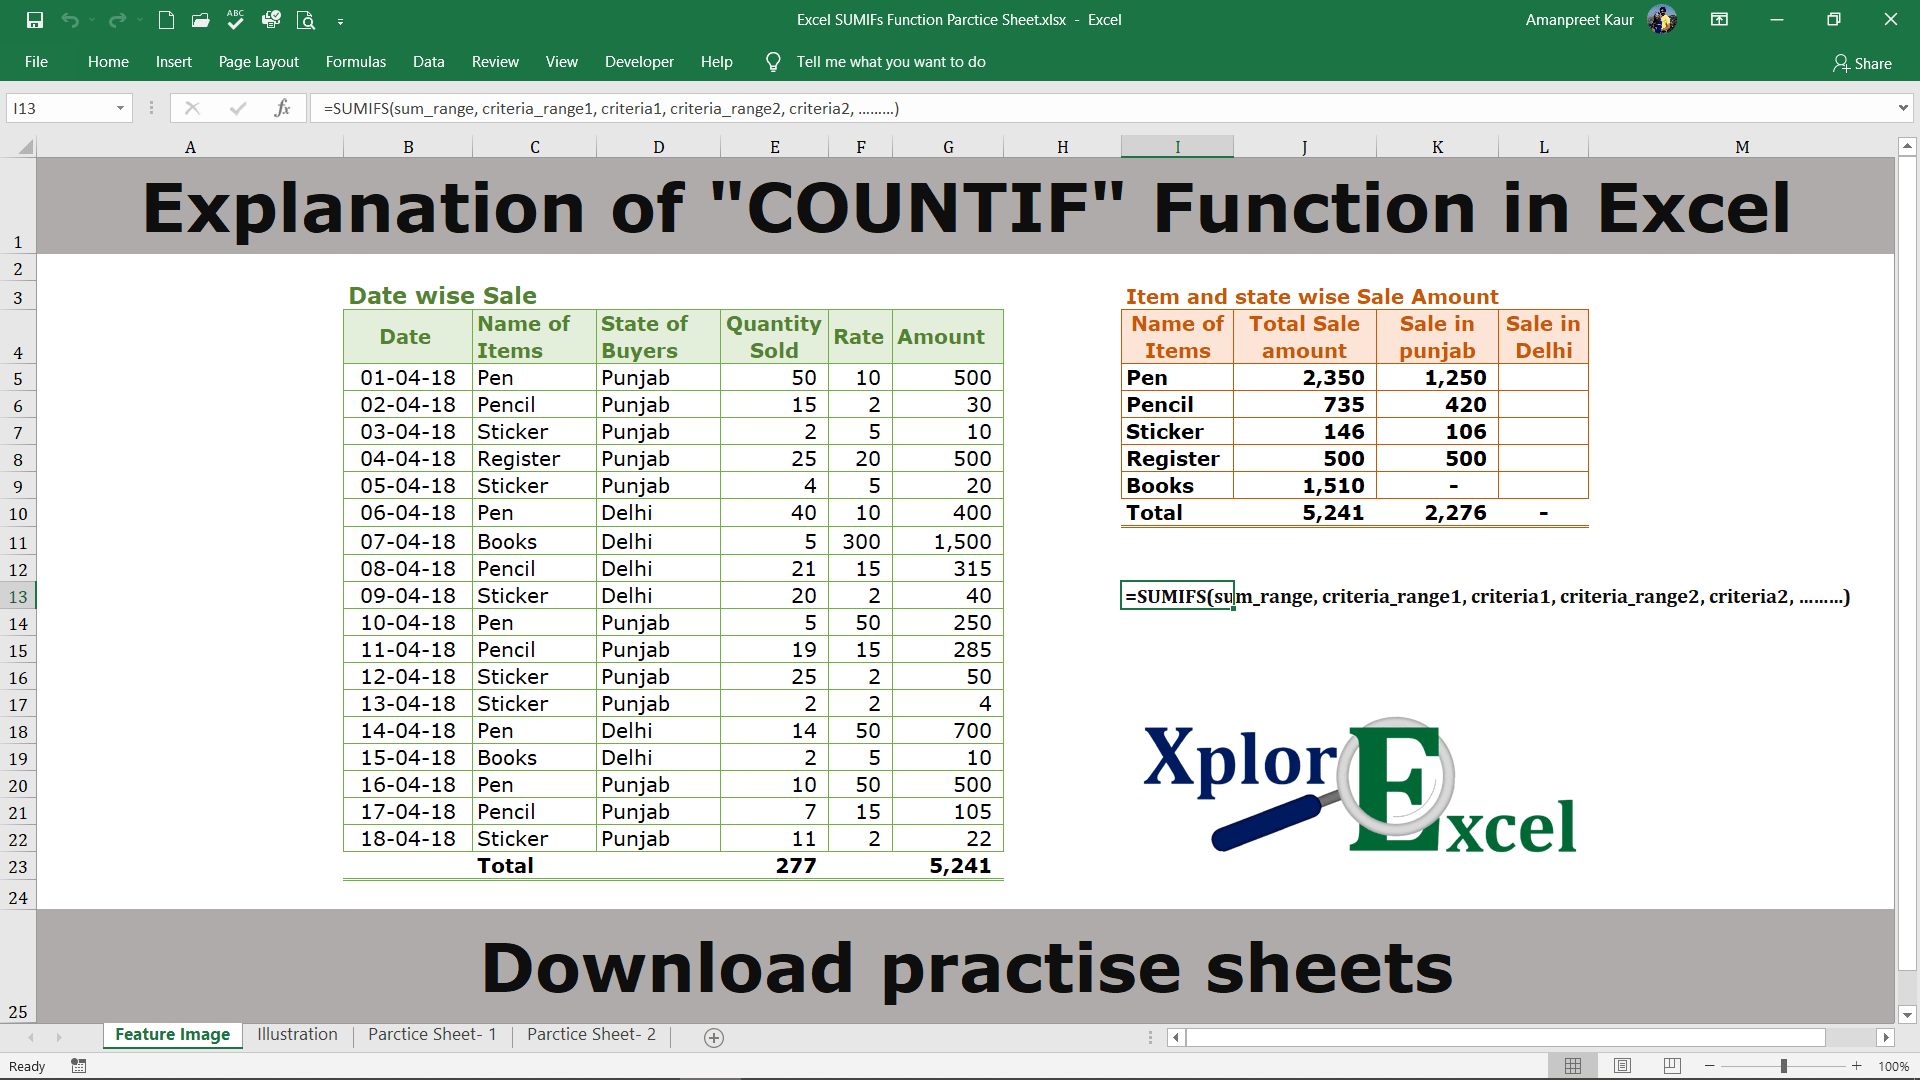 Excel SUMIFS Function - Download 28 practice Sheet for free